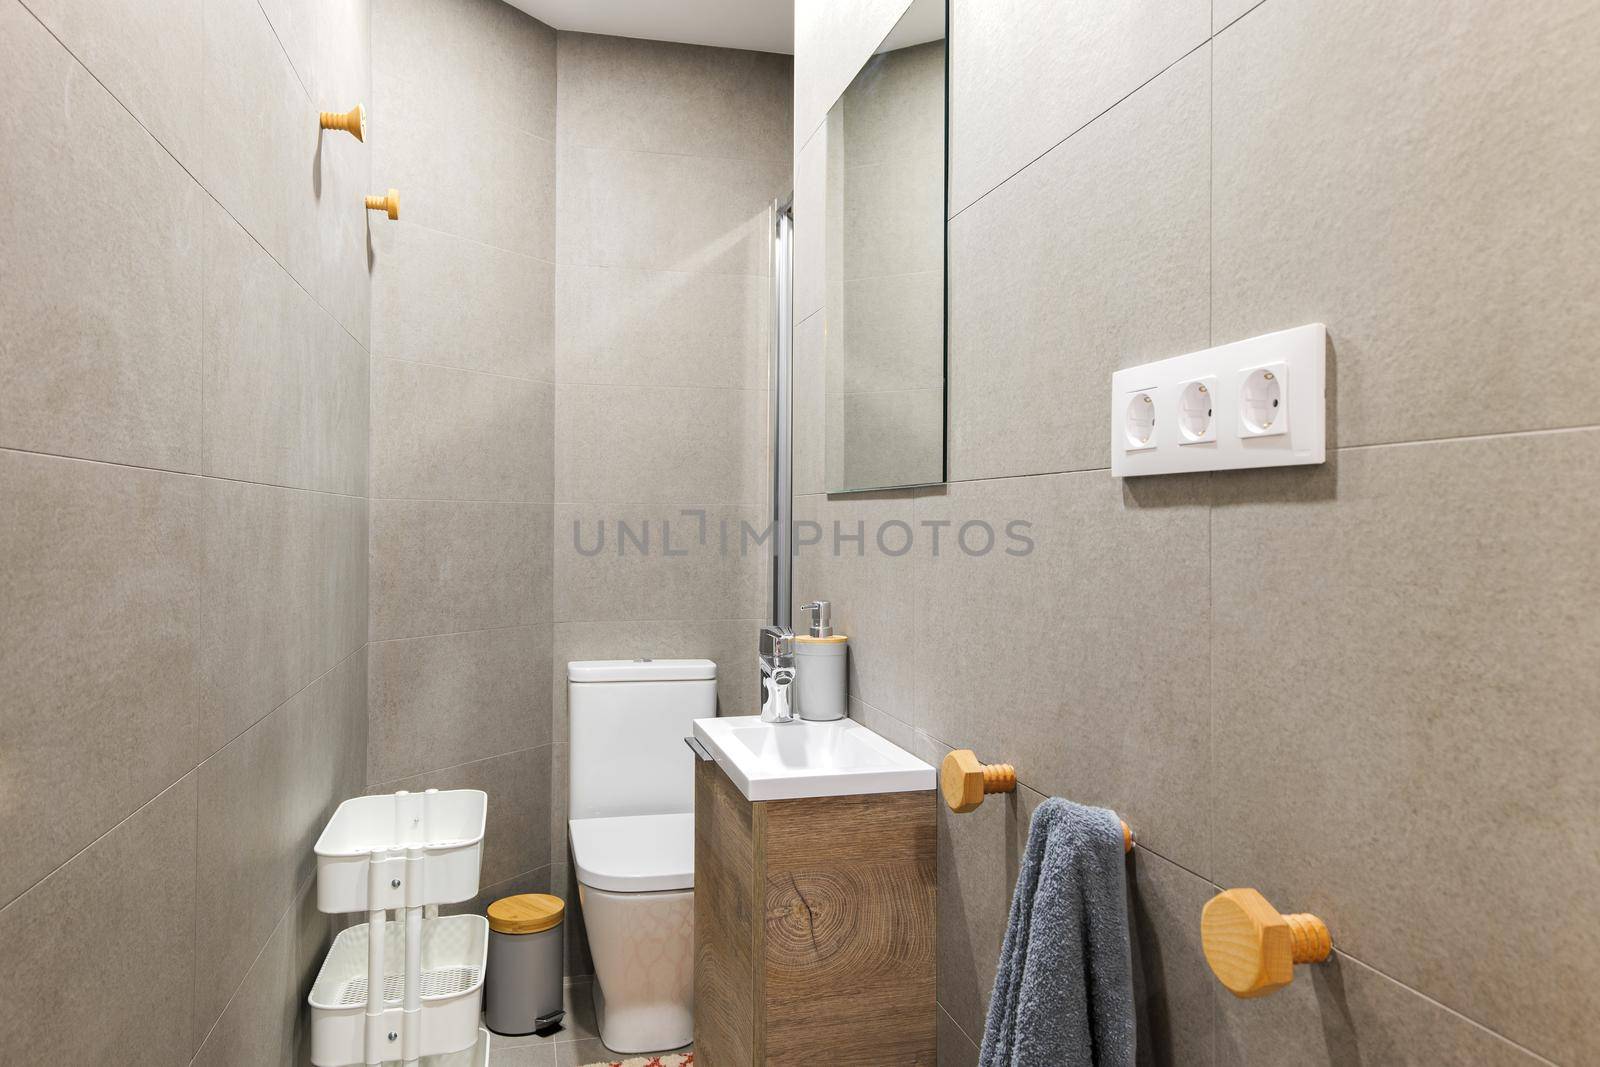 Photo of a narrow bathroom with floor tiles resembling wood and glass shower enclosure